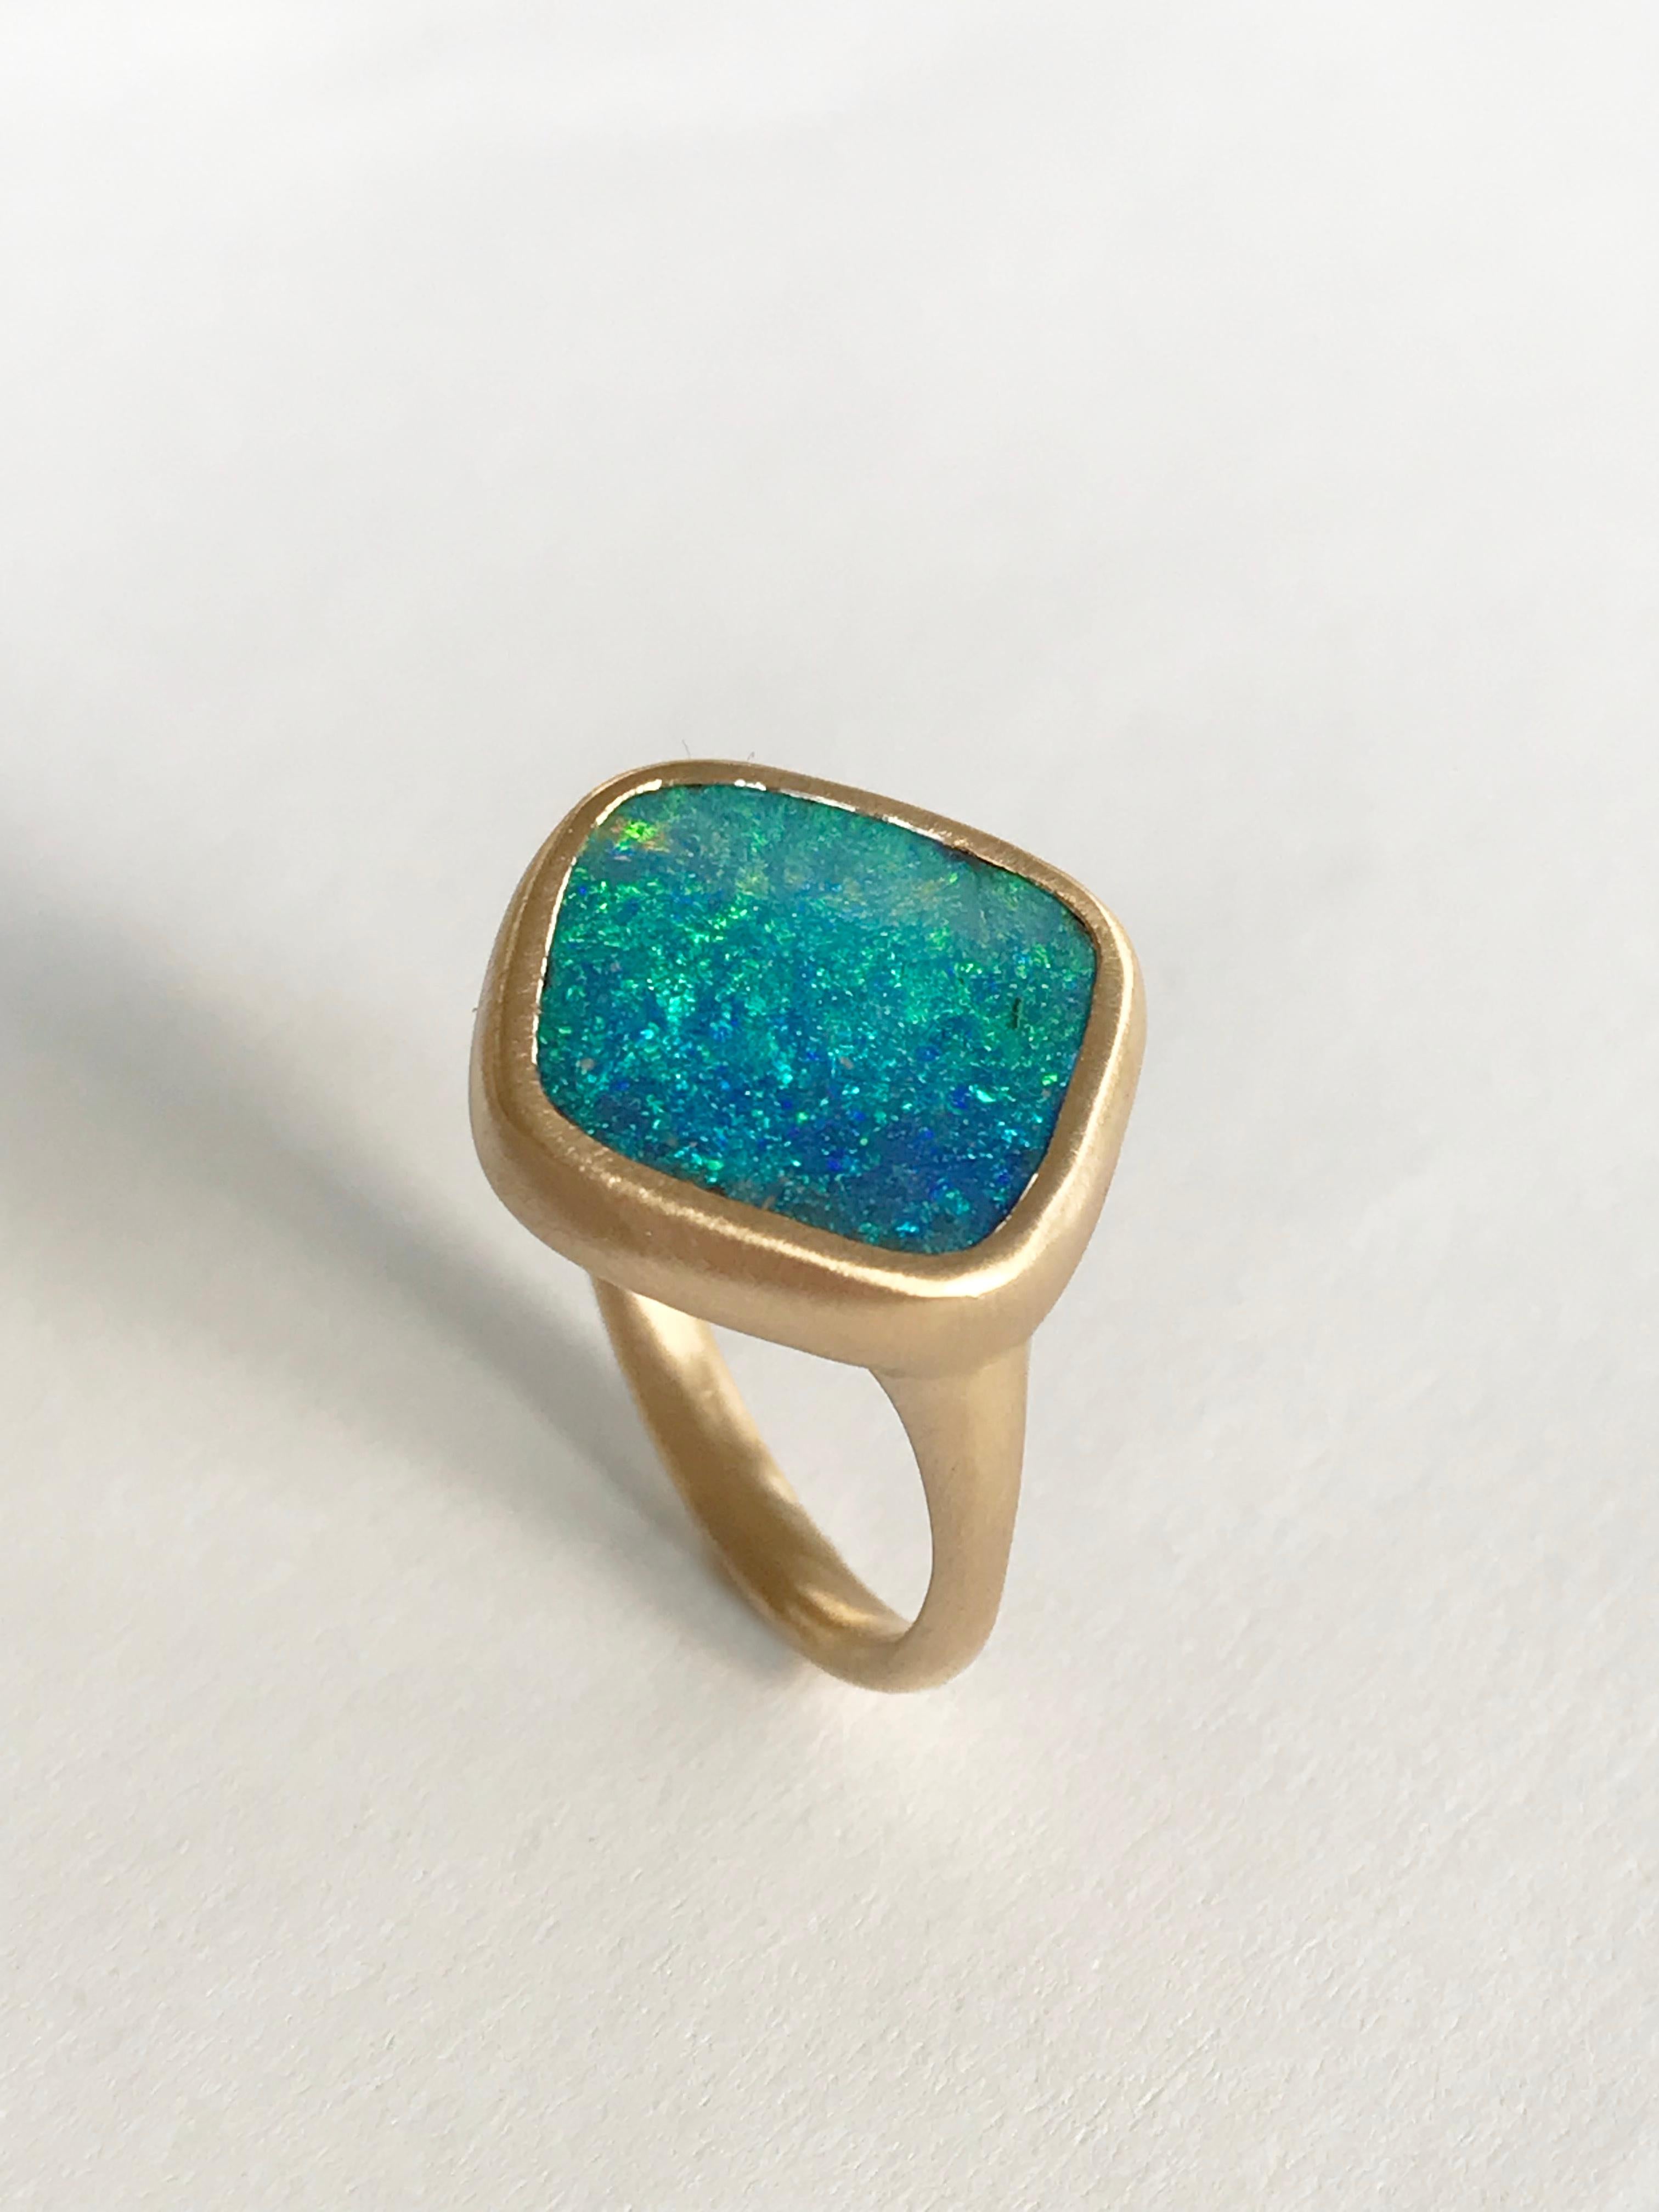 Dalben Blue Green Boulder Opal Yellow Gold Ring For Sale 3